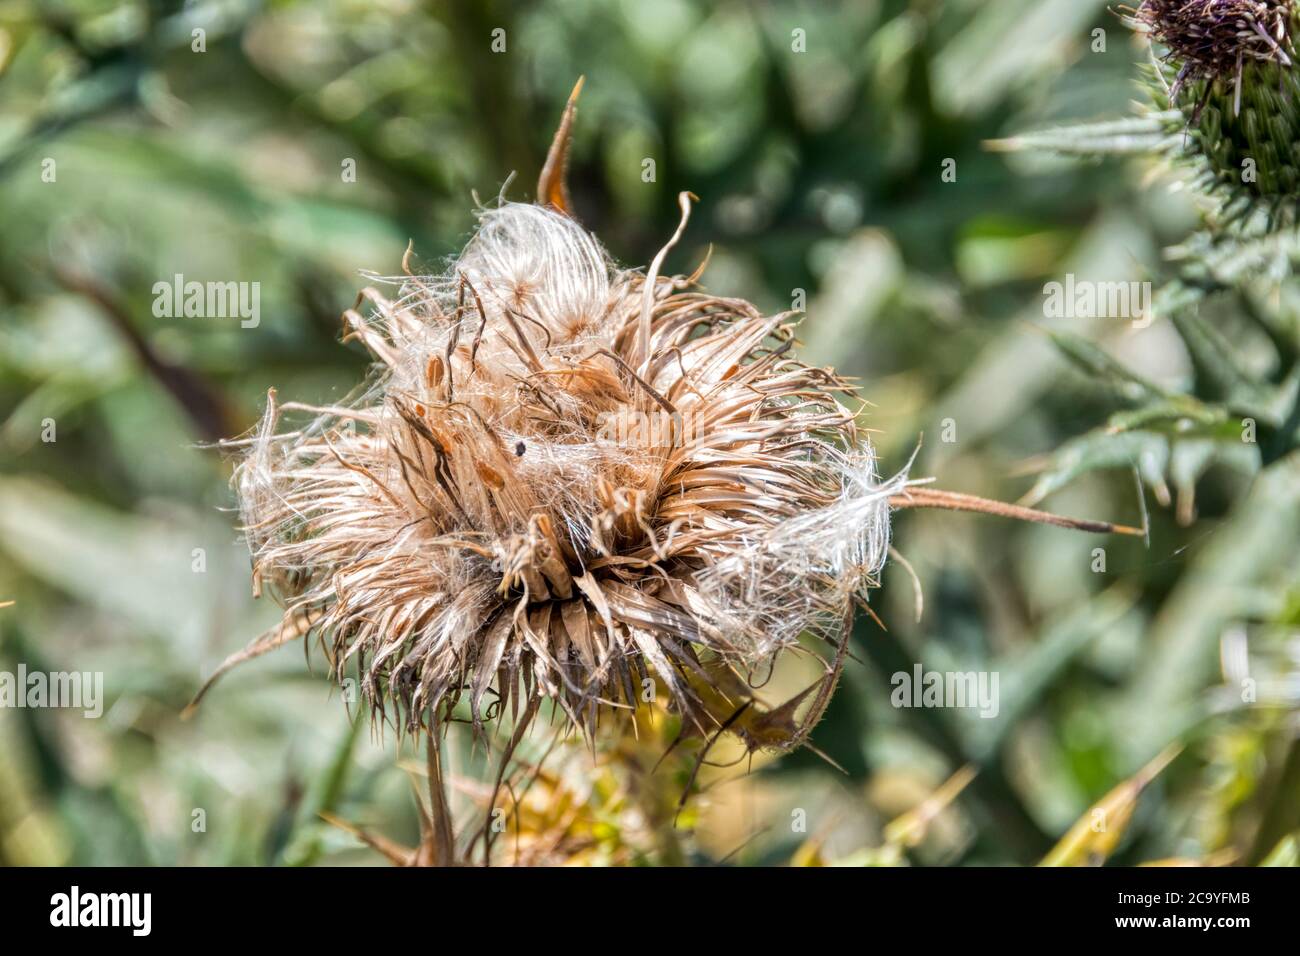 Thistle flower pecked out by goldfinches eating the seed. Stock Photo